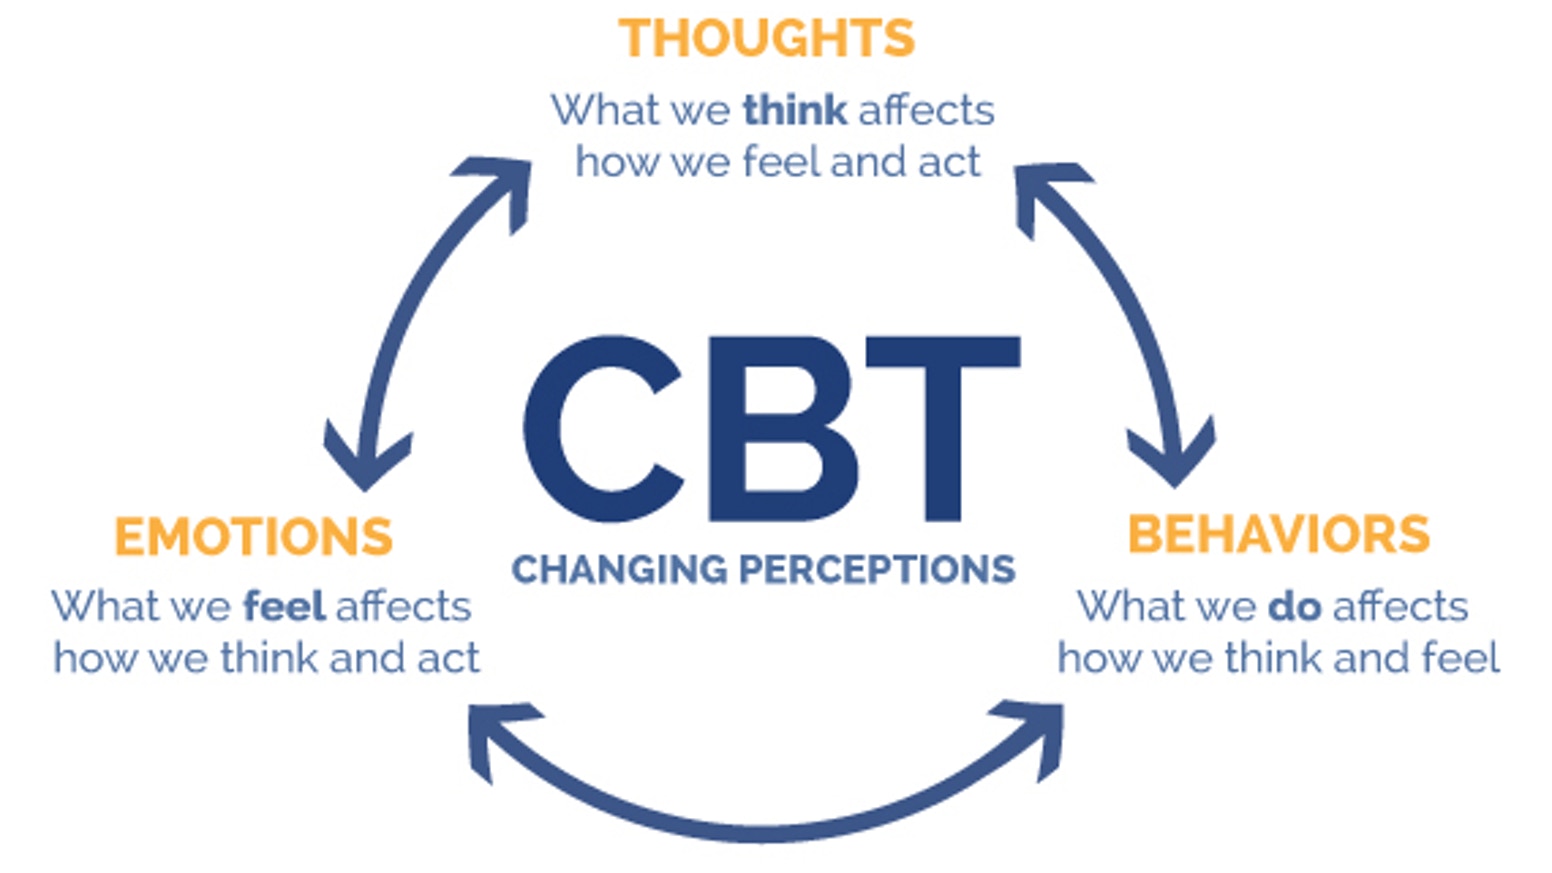 Changing Perceptions: Thoughts, Behaviors, Emotions